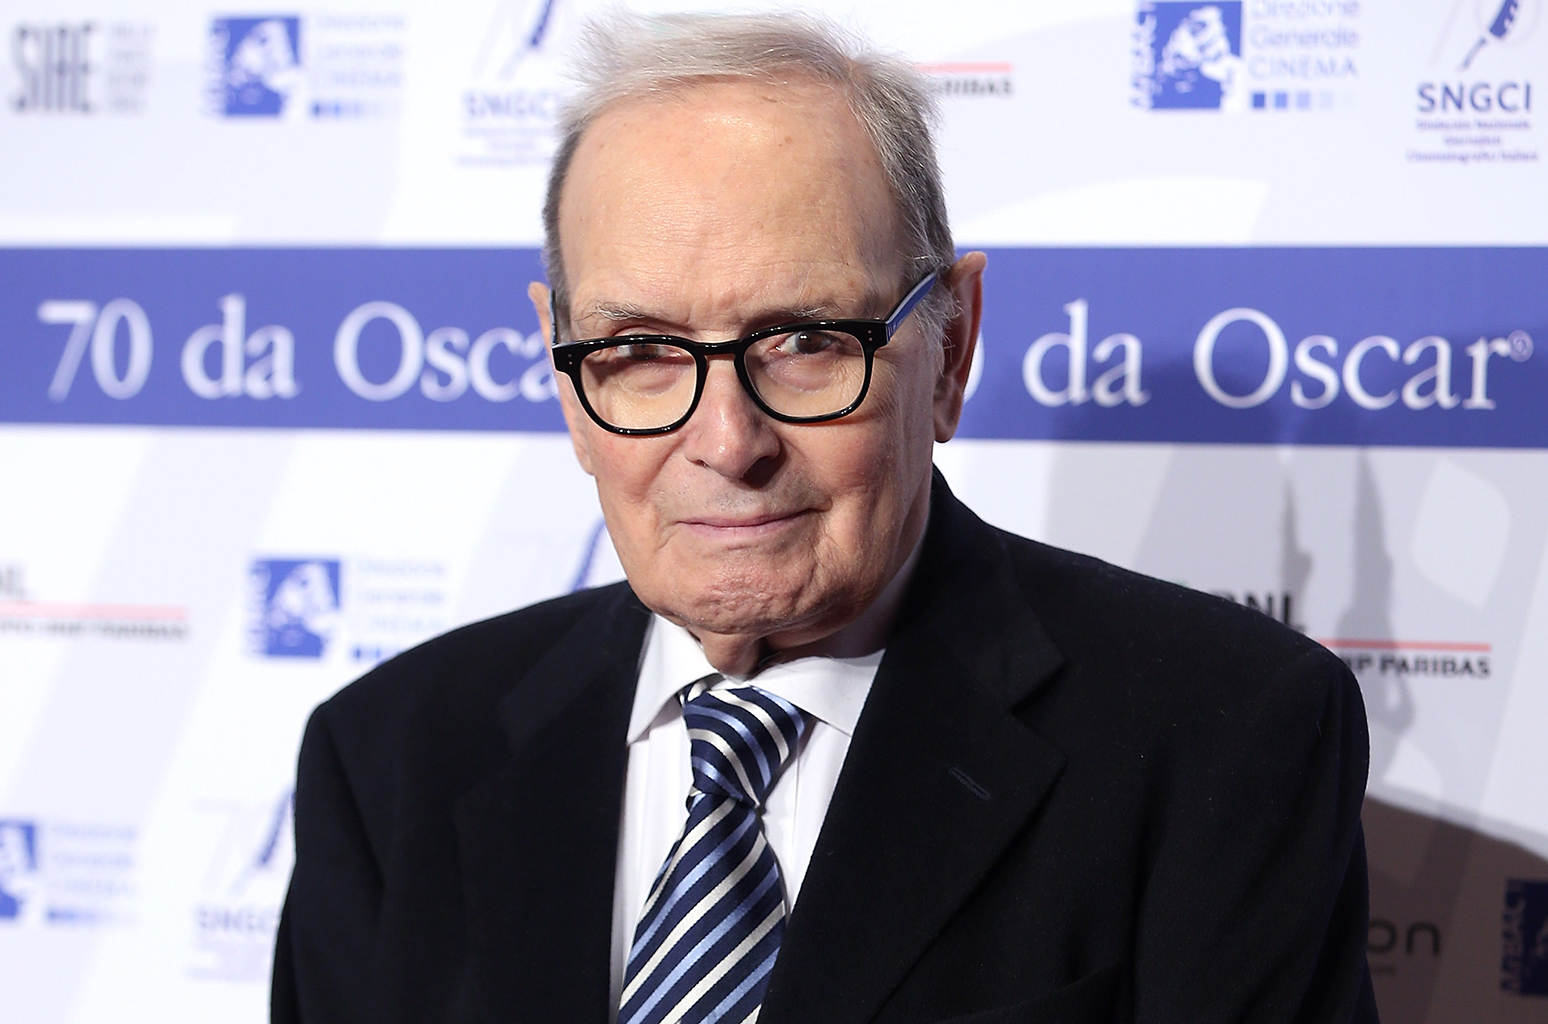 Where the Hell Did That Ennio Morricone Quote About Quentin Tarantino Come From?